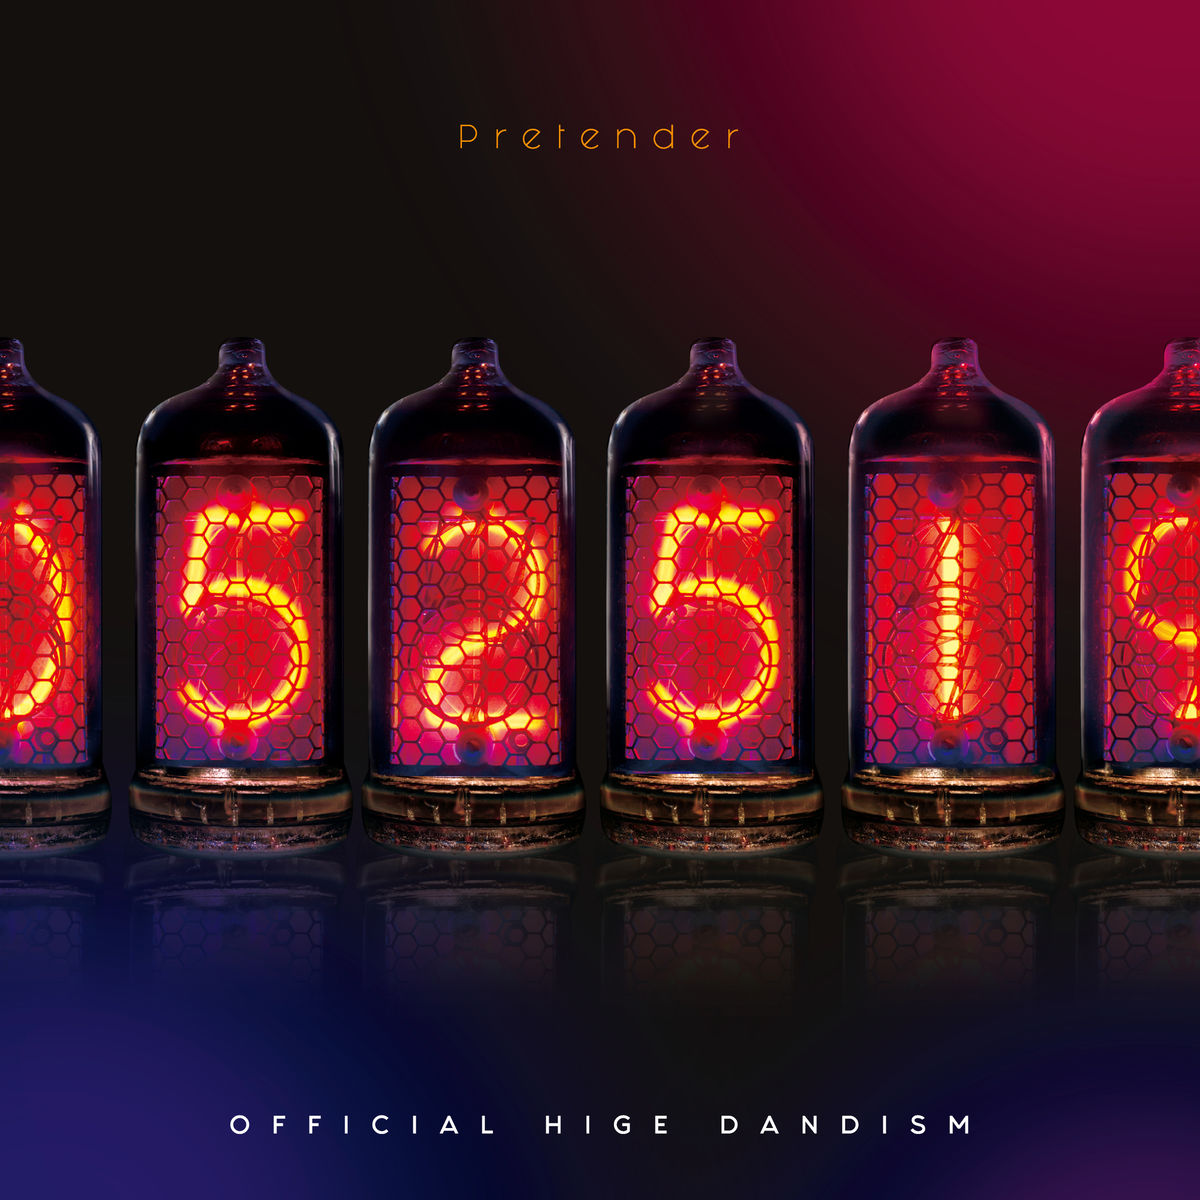 Cover for『Official HIGE DANdism - Pretender』from the release『Pretender』